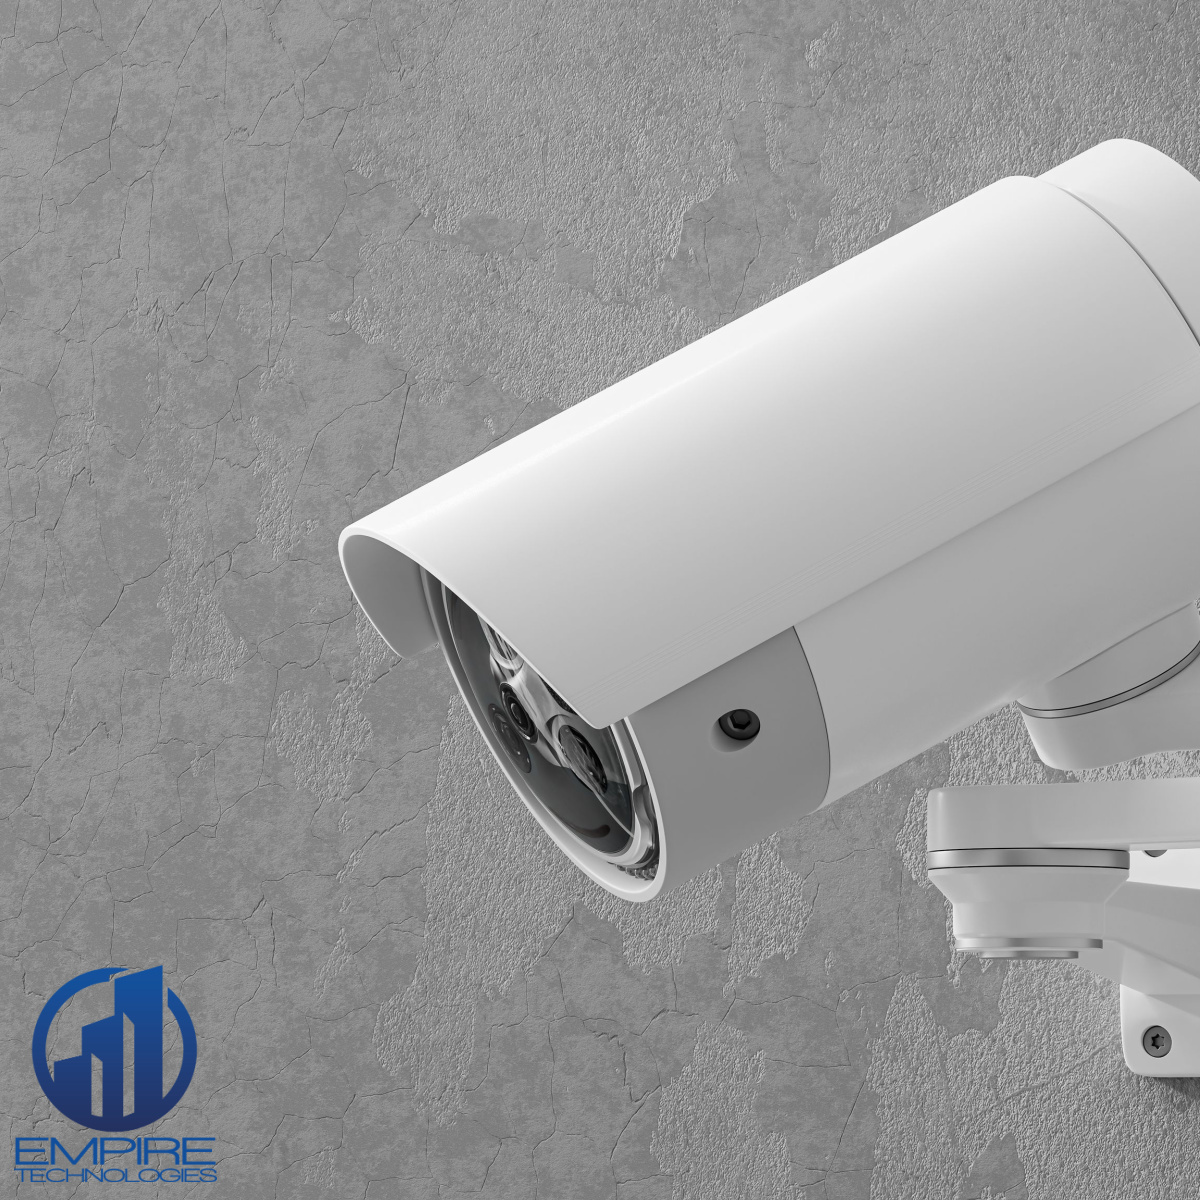 Surveillance and Security Camera Installation: Enhance Surveillance Of Your Property At An Affordable Price